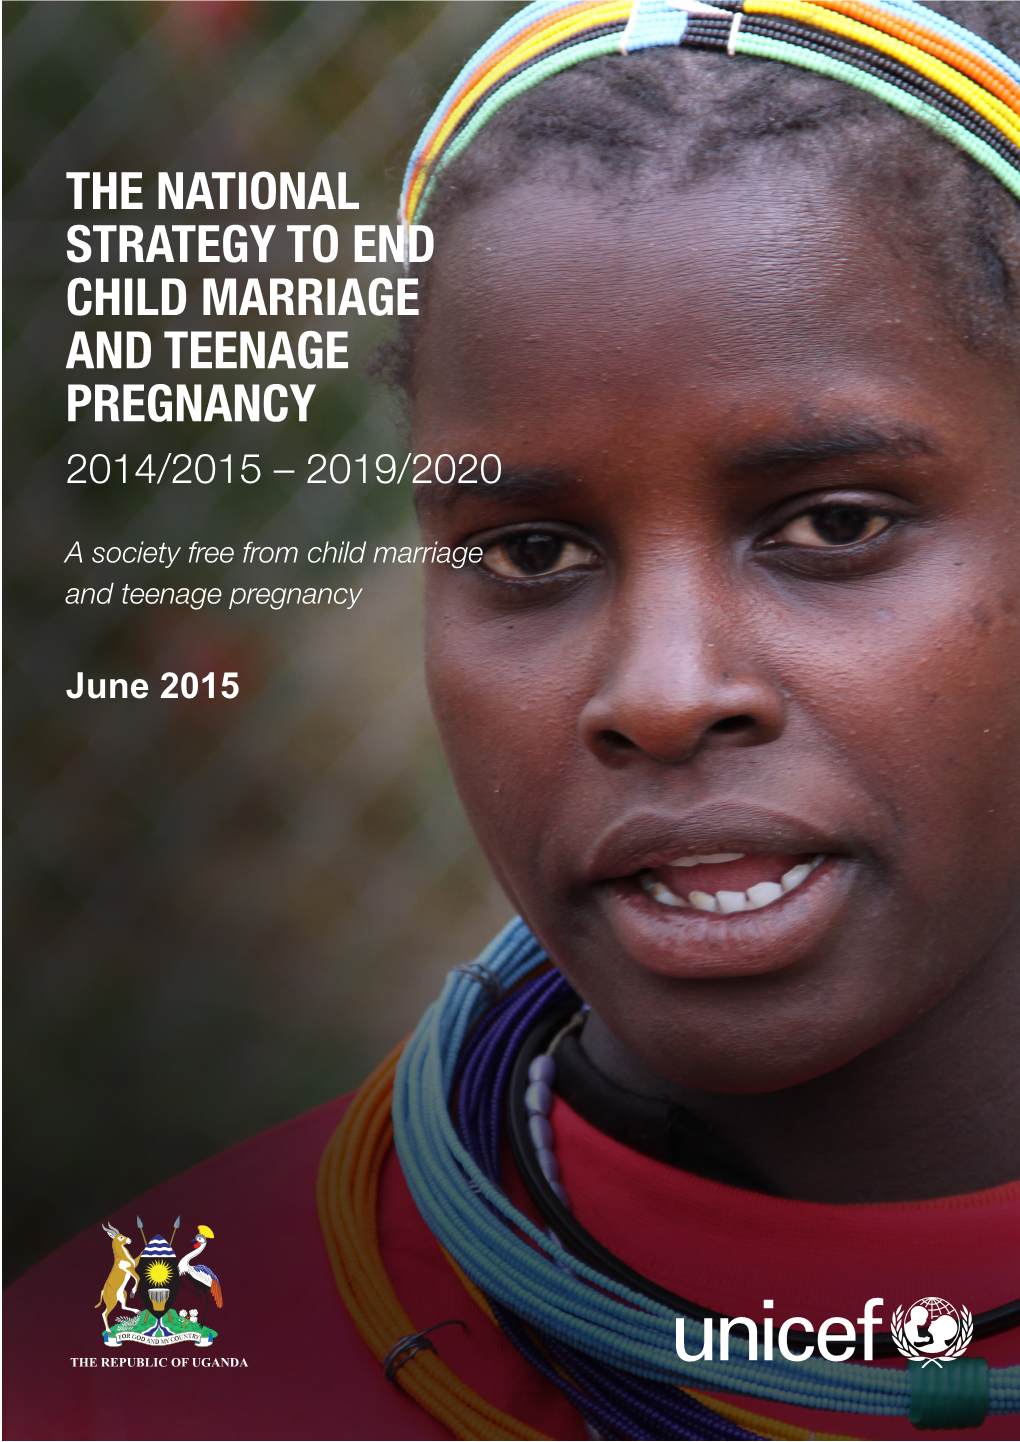 The National Strategy to End Child Marriage and Teenage Pregnancy 2014/2015 – 2019/2020